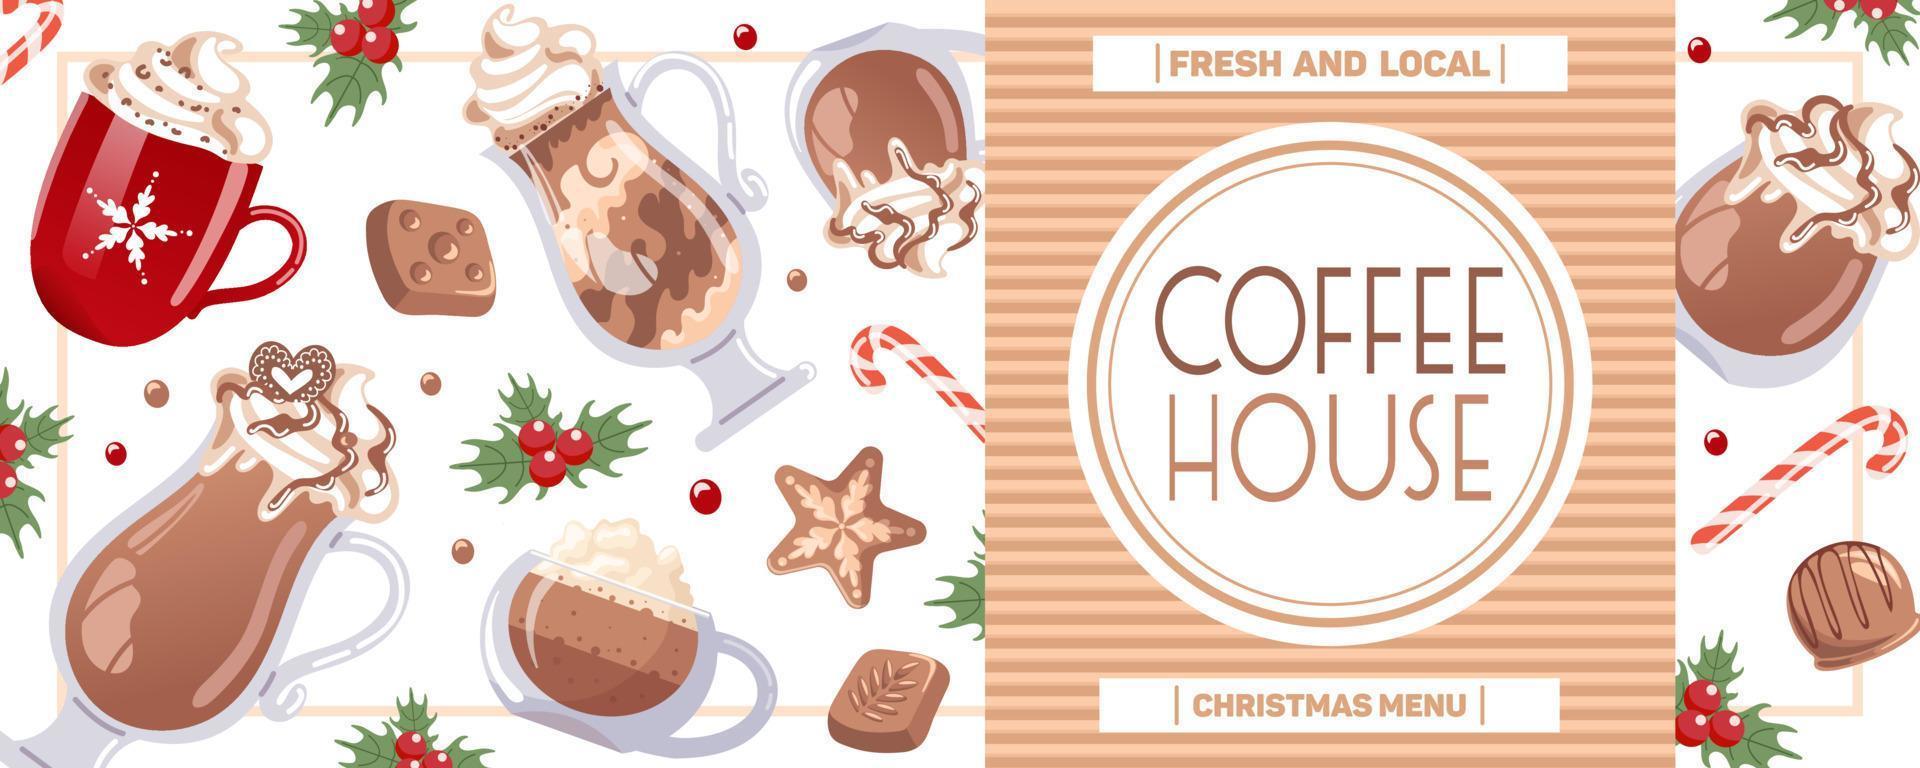 Winter Christmas drinks. Cappuccino, latte and mocha in a glass, whipped cream, chocolates, candy cane, holly. Horizontal banner for coffee shop, cafe, barista. for banner, flyer, advertising, menu. vector